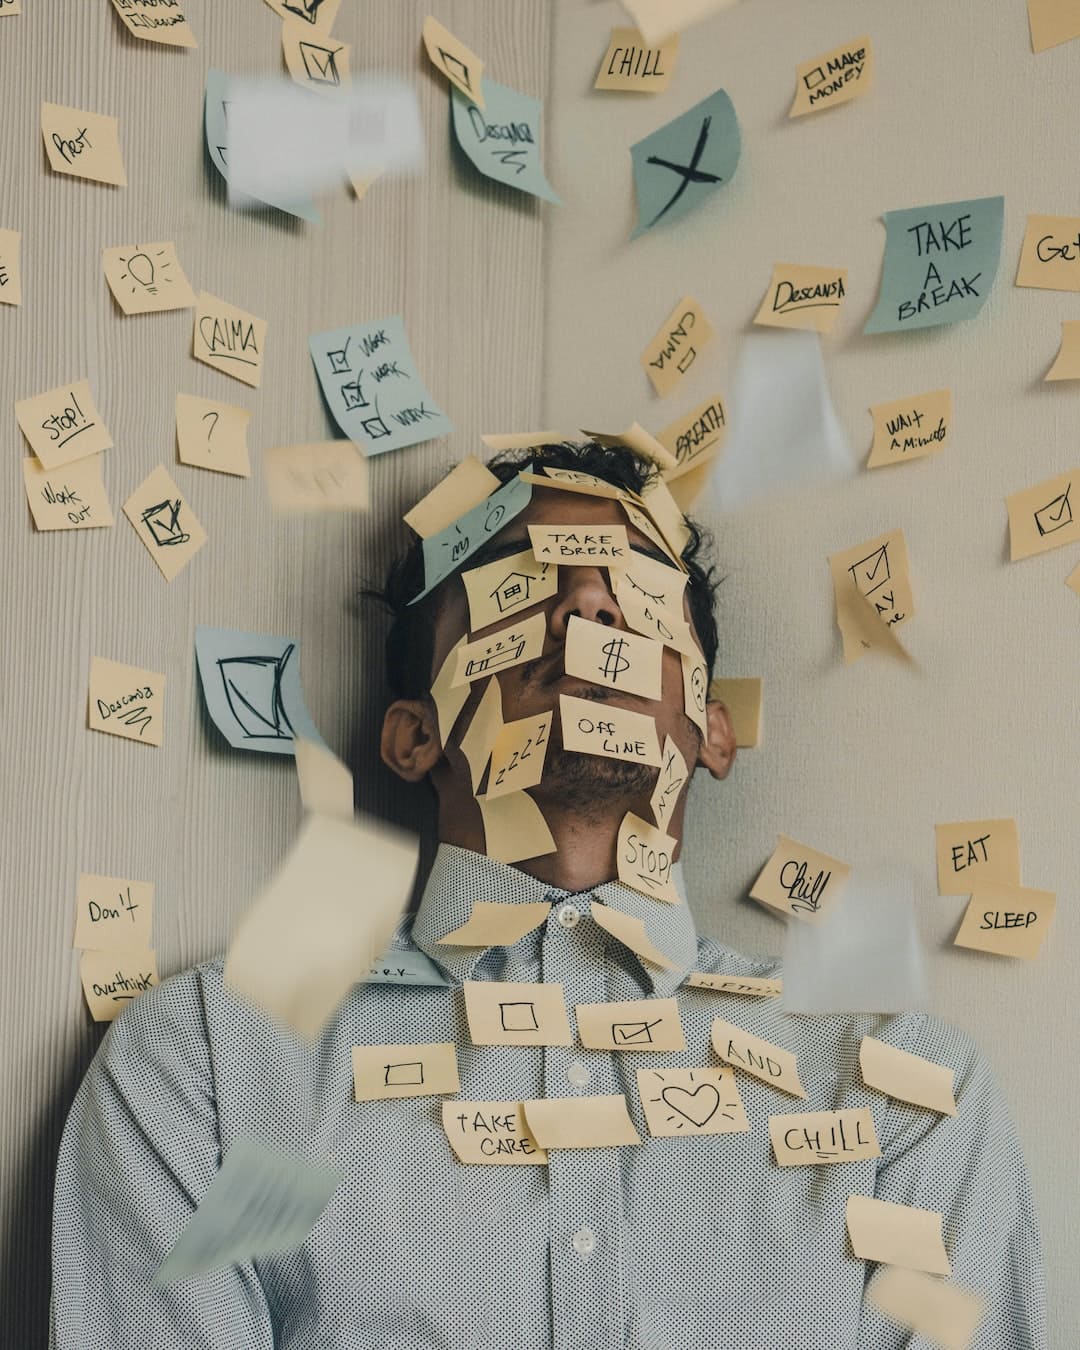 a boy standing alongside wall corner with sticky notes on face and walls